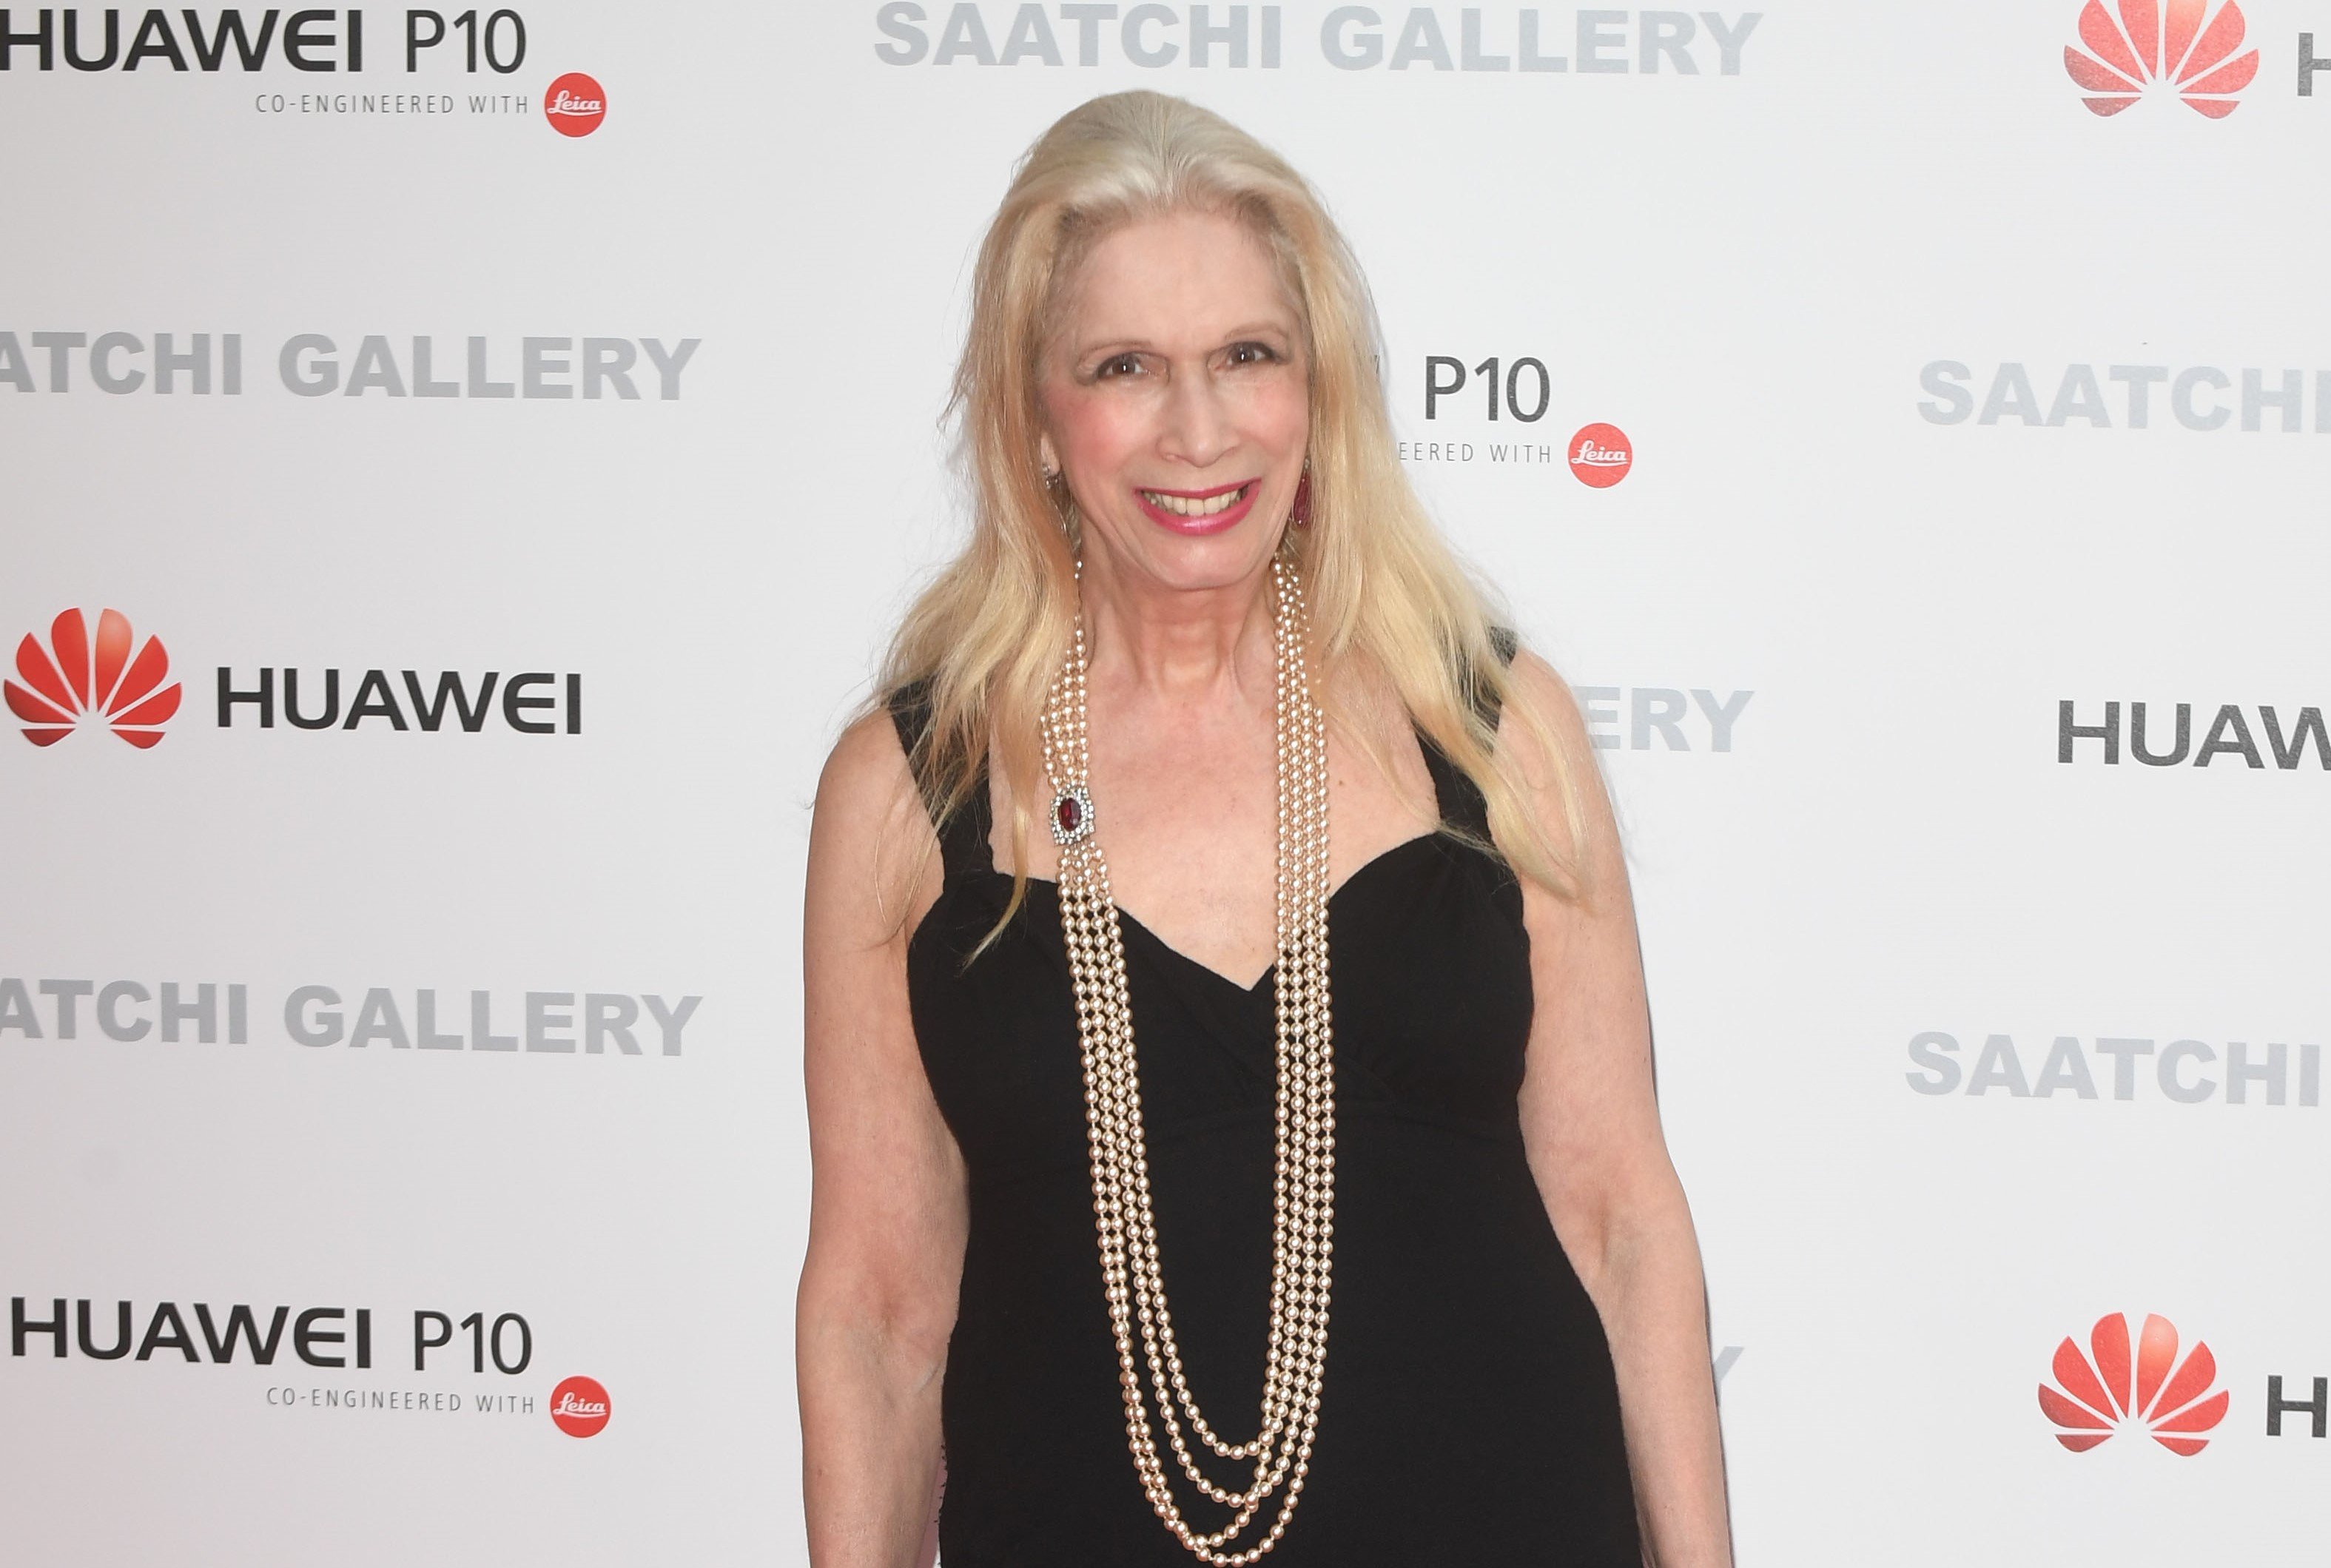  Lady Colin Campbell arriving on red carpet at the Saatchi Gallery